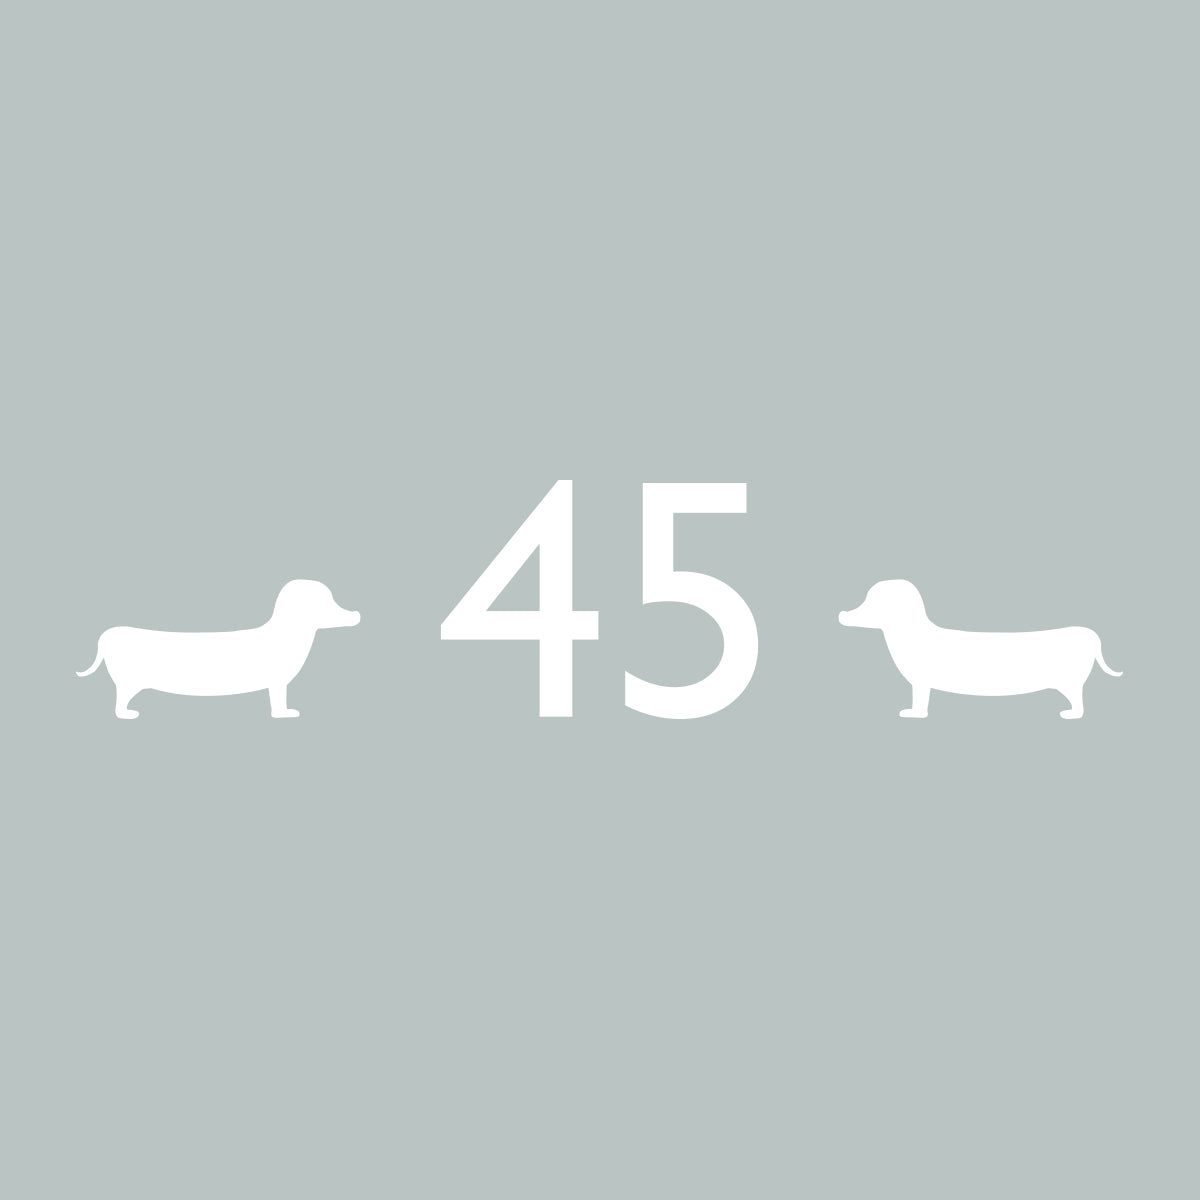 Gill Sans Number & Dogs.